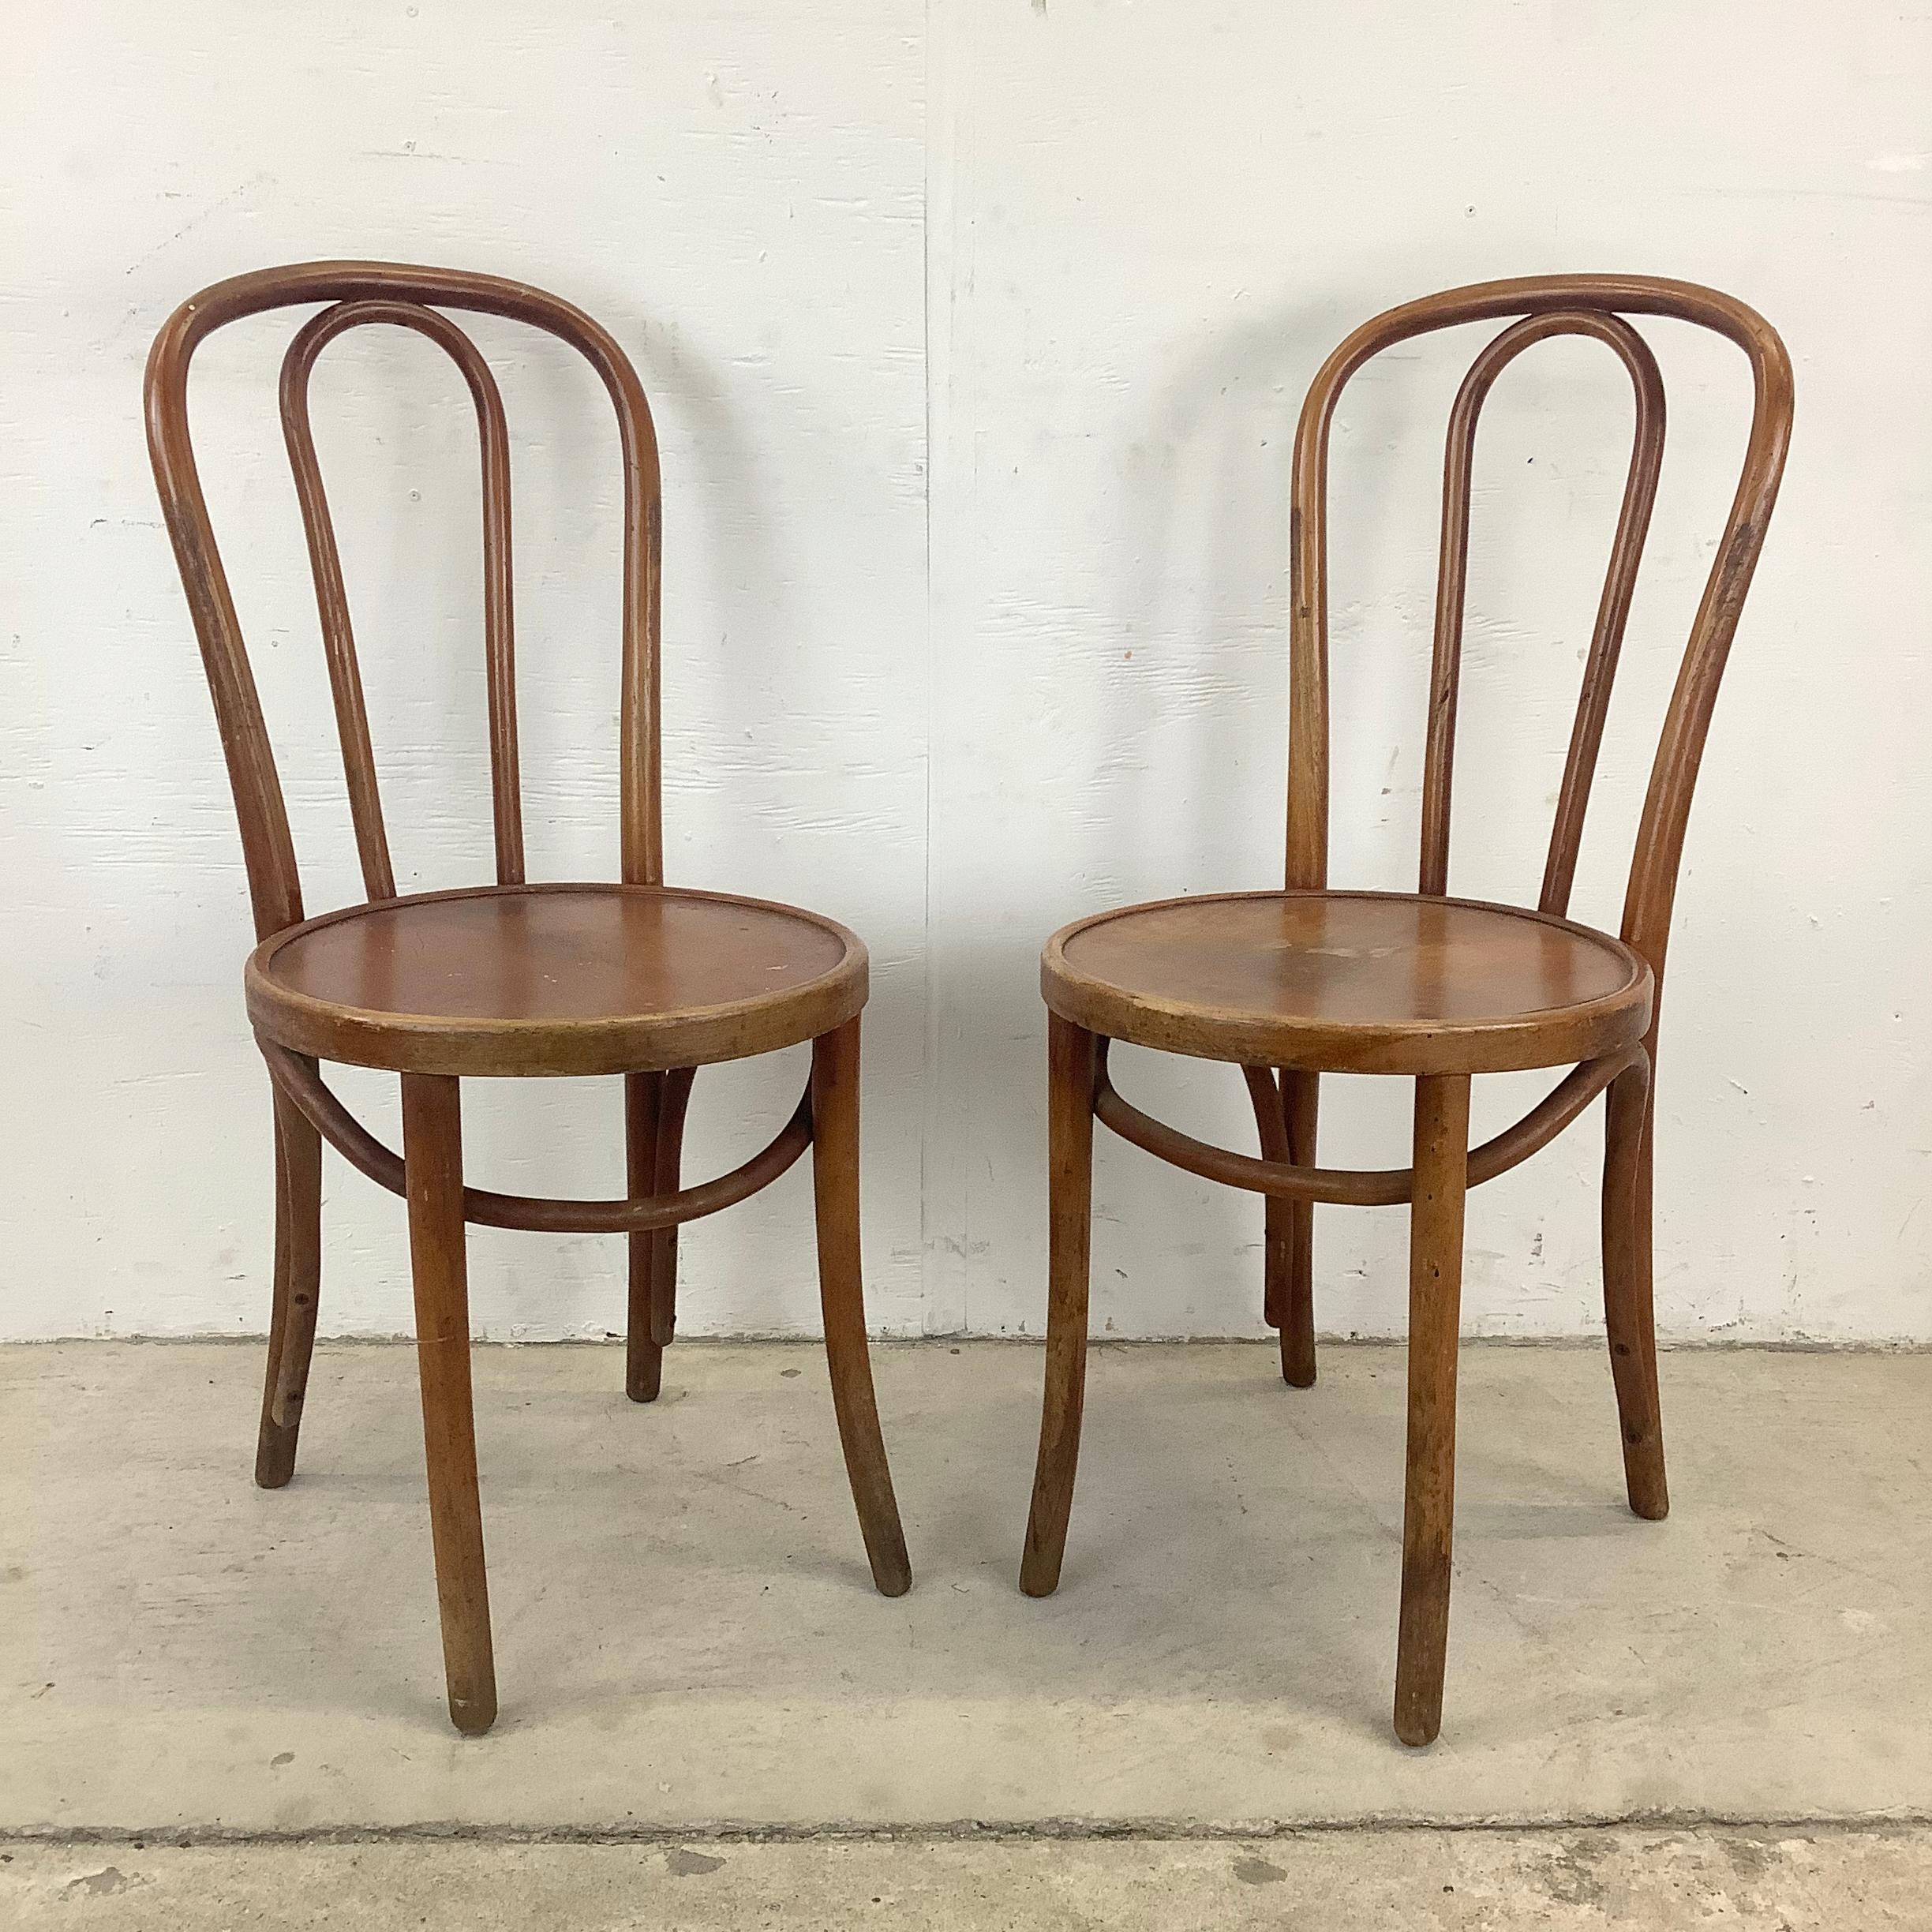 Step into the charm of yesteryear with this vintage pair of Bentwood Thonet Cafe Chairs, a delightful blend of classic design and enduring appeal. Crafted with bentwood seatbacks that boast the iconic Thonet style, these chairs exude timeless